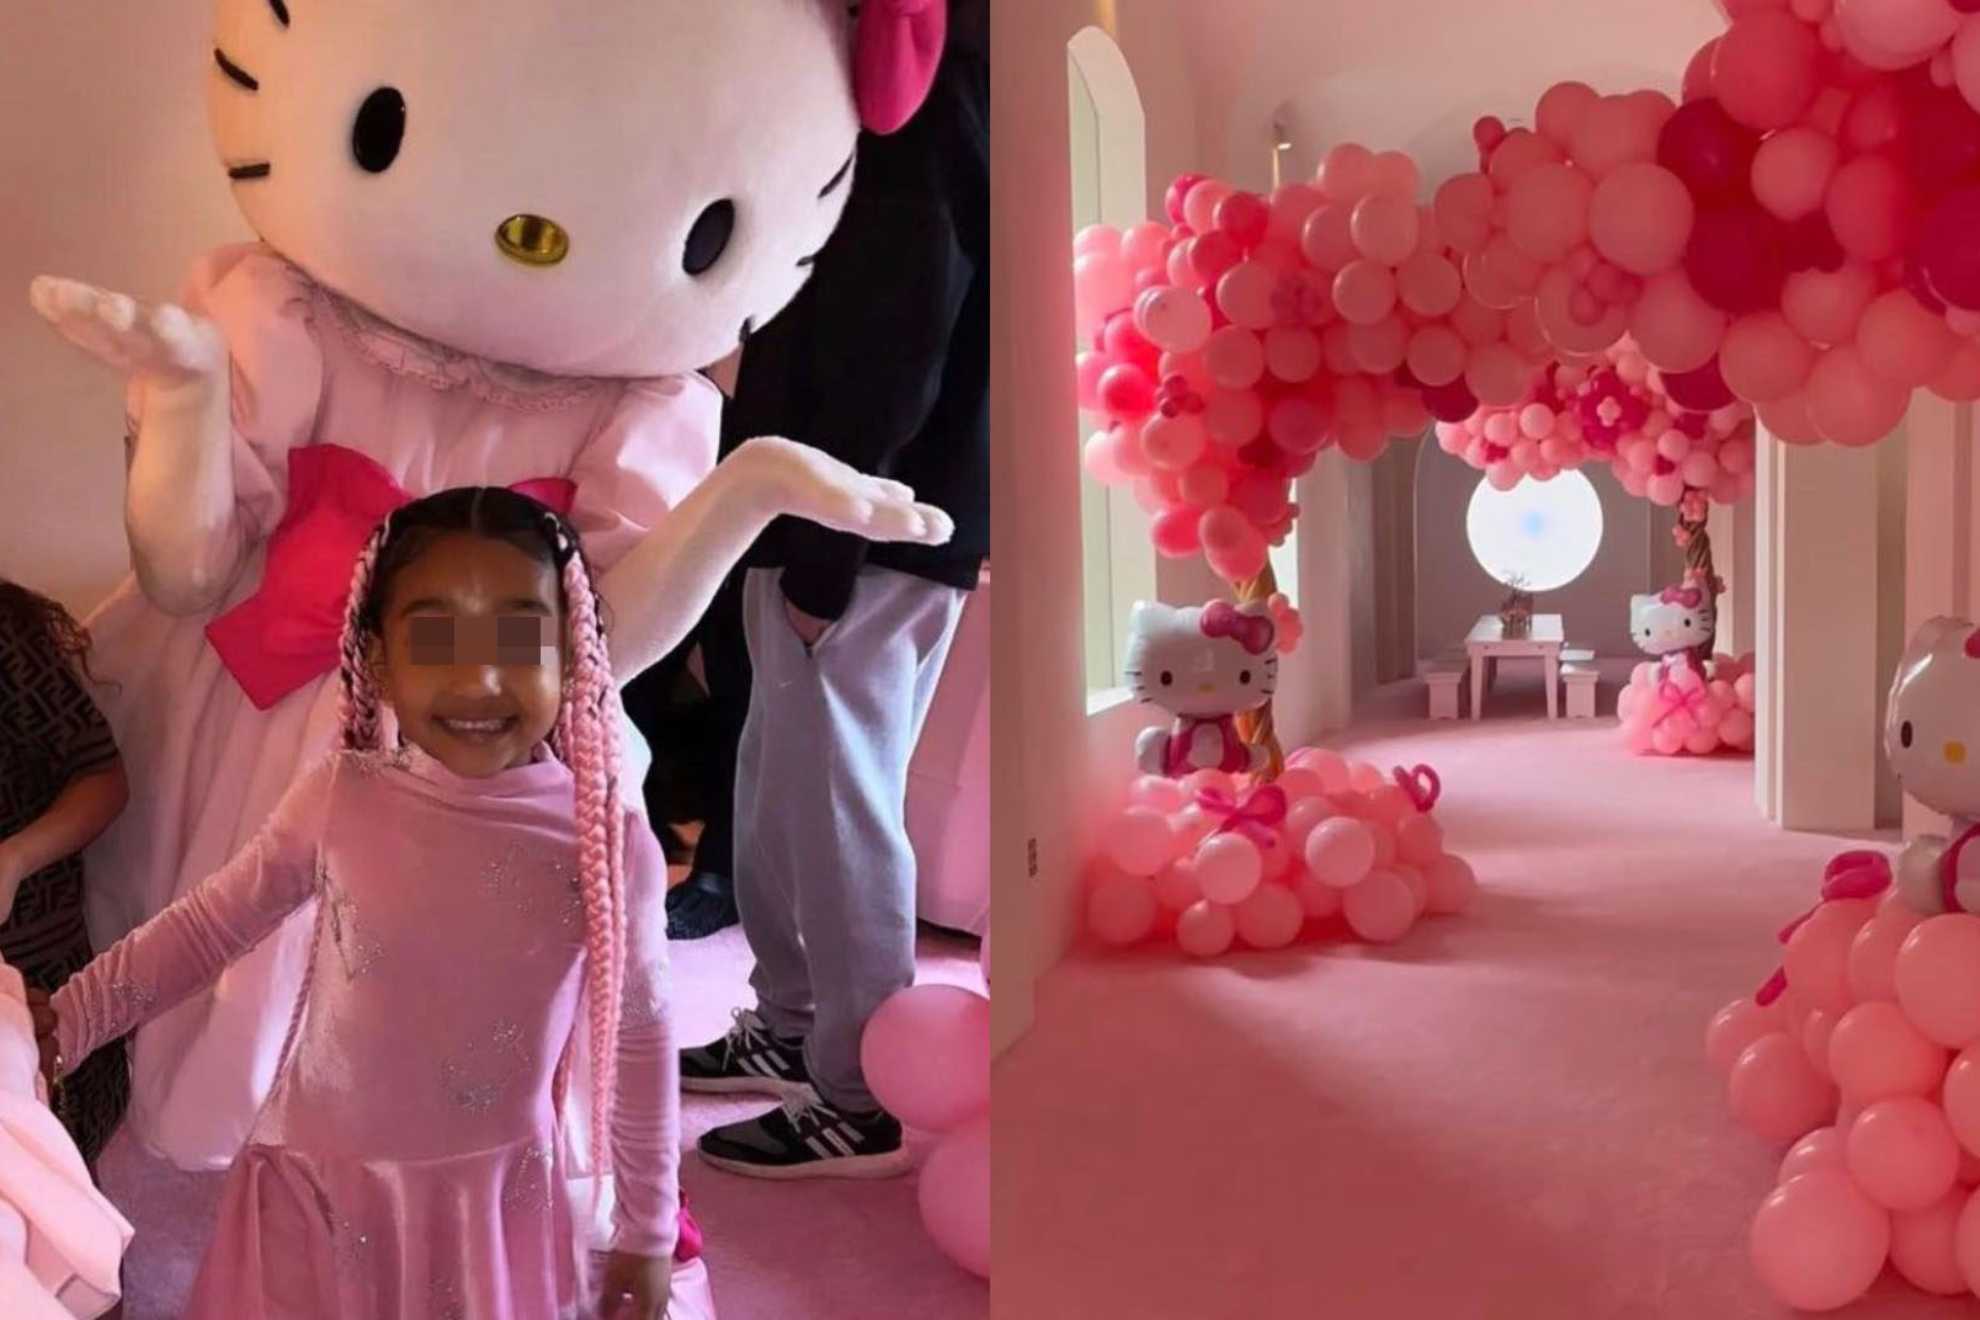 Kim Kardashian celebrates daughter Chicago West's birthday with epic Hello Kitty party, Kanye West wasn't invited